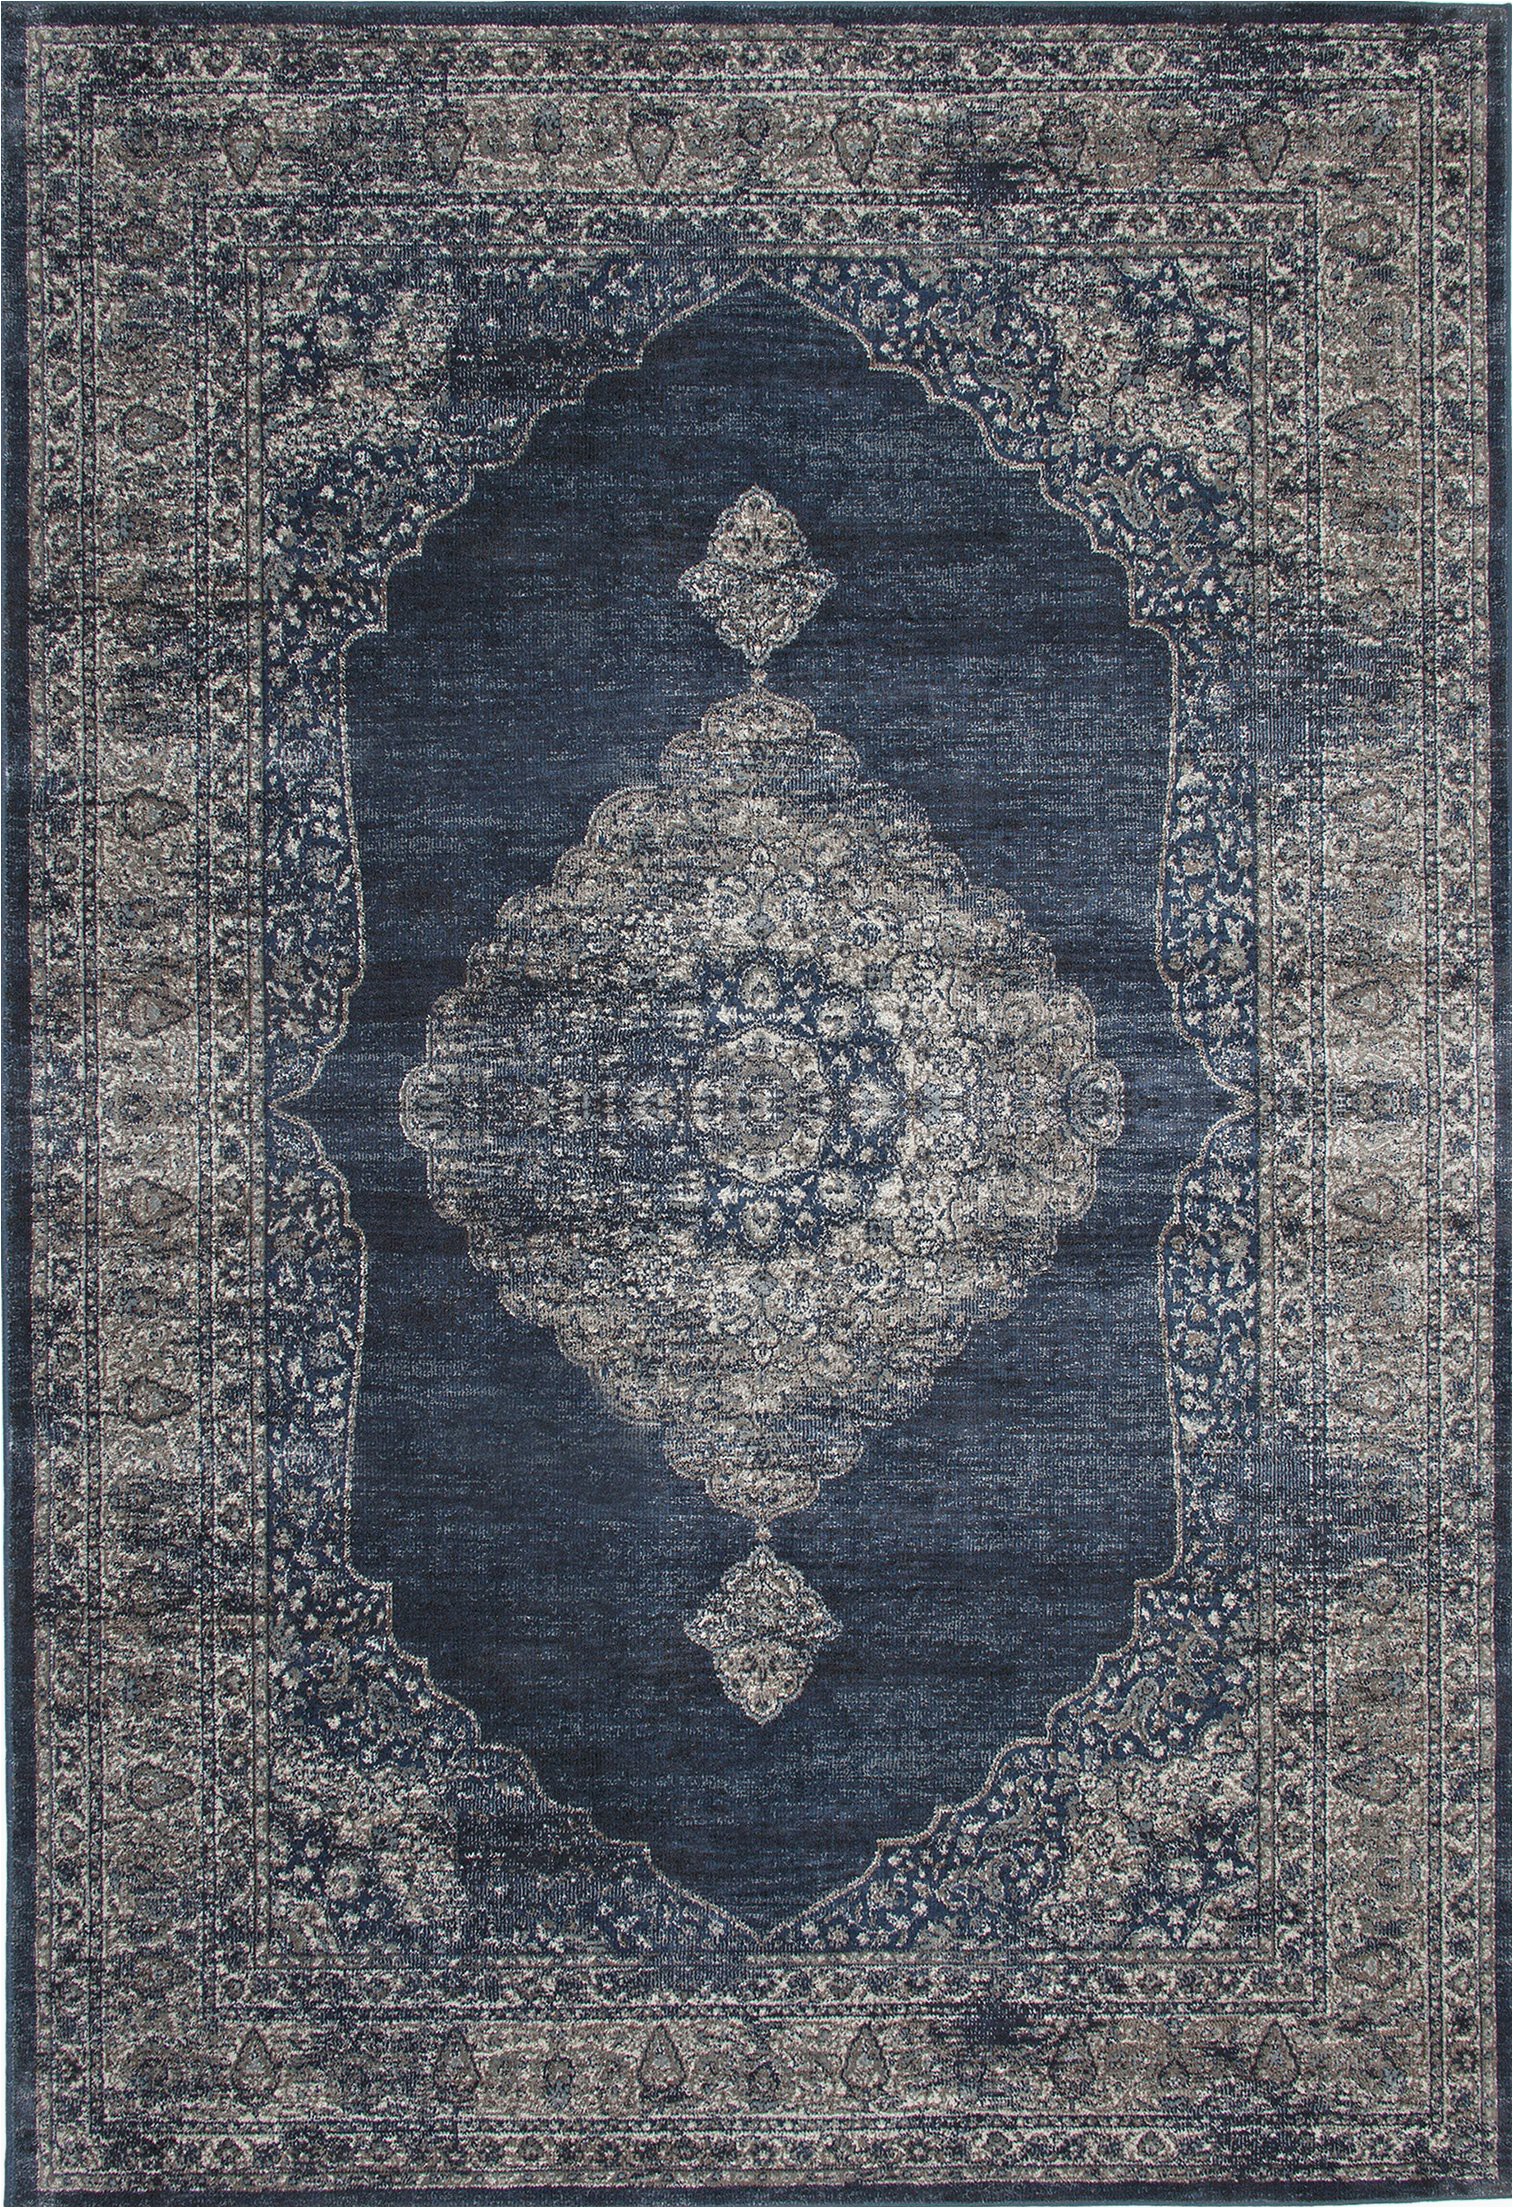 Faded Blue Persian Rug Navy Blue and Silver Faded Worn Overdyed Style Rug